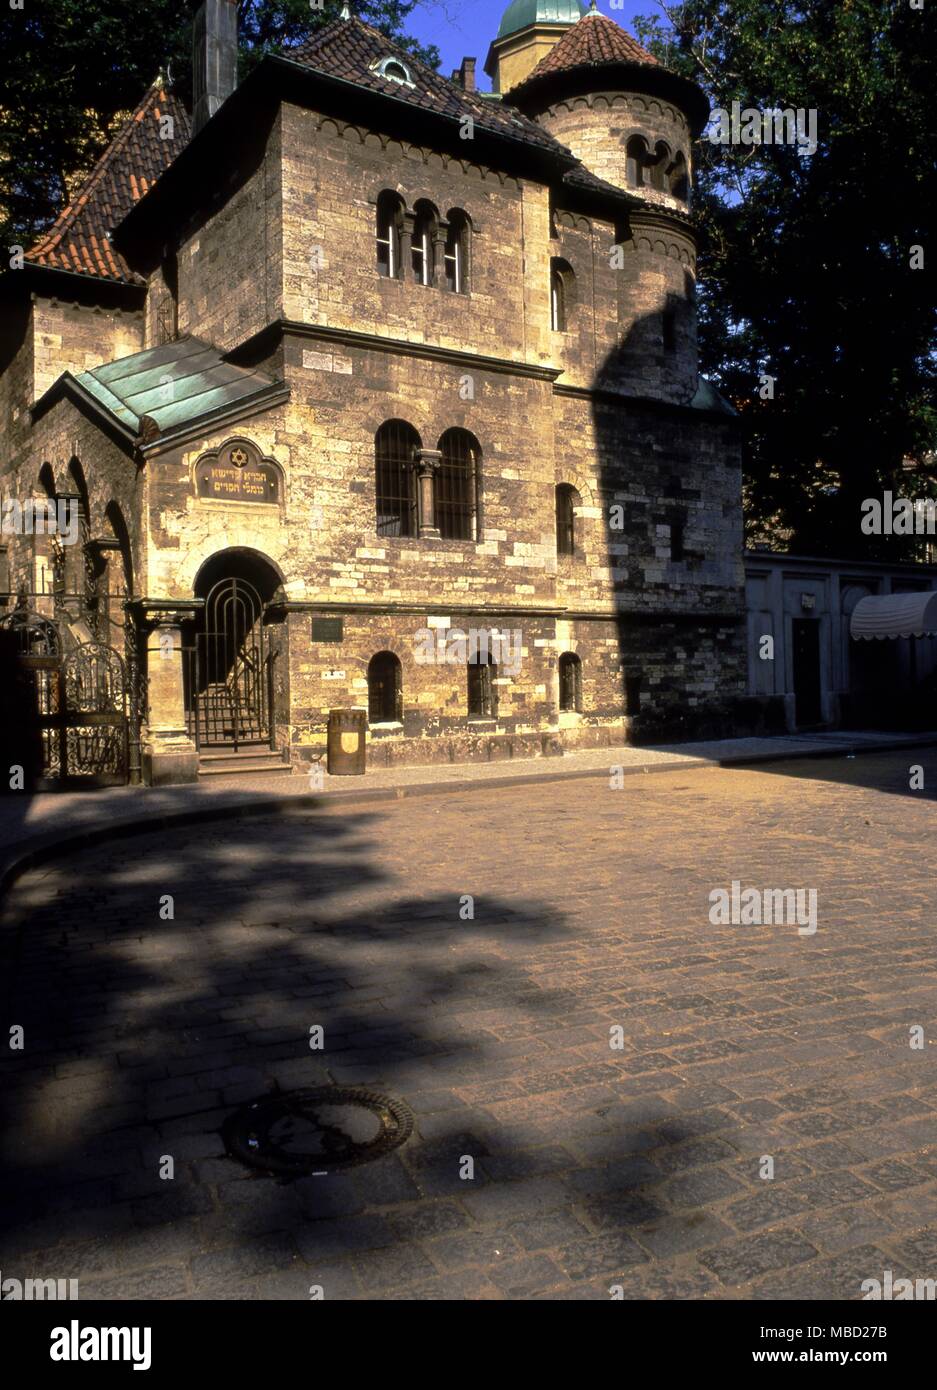 Jewish Mythology. The Ceremonial House, Obradni Sin, which houses the Jewish Museum Collection. It is the entrance to the Jewish cemetery in Prague. Czech Republic. Stock Photo